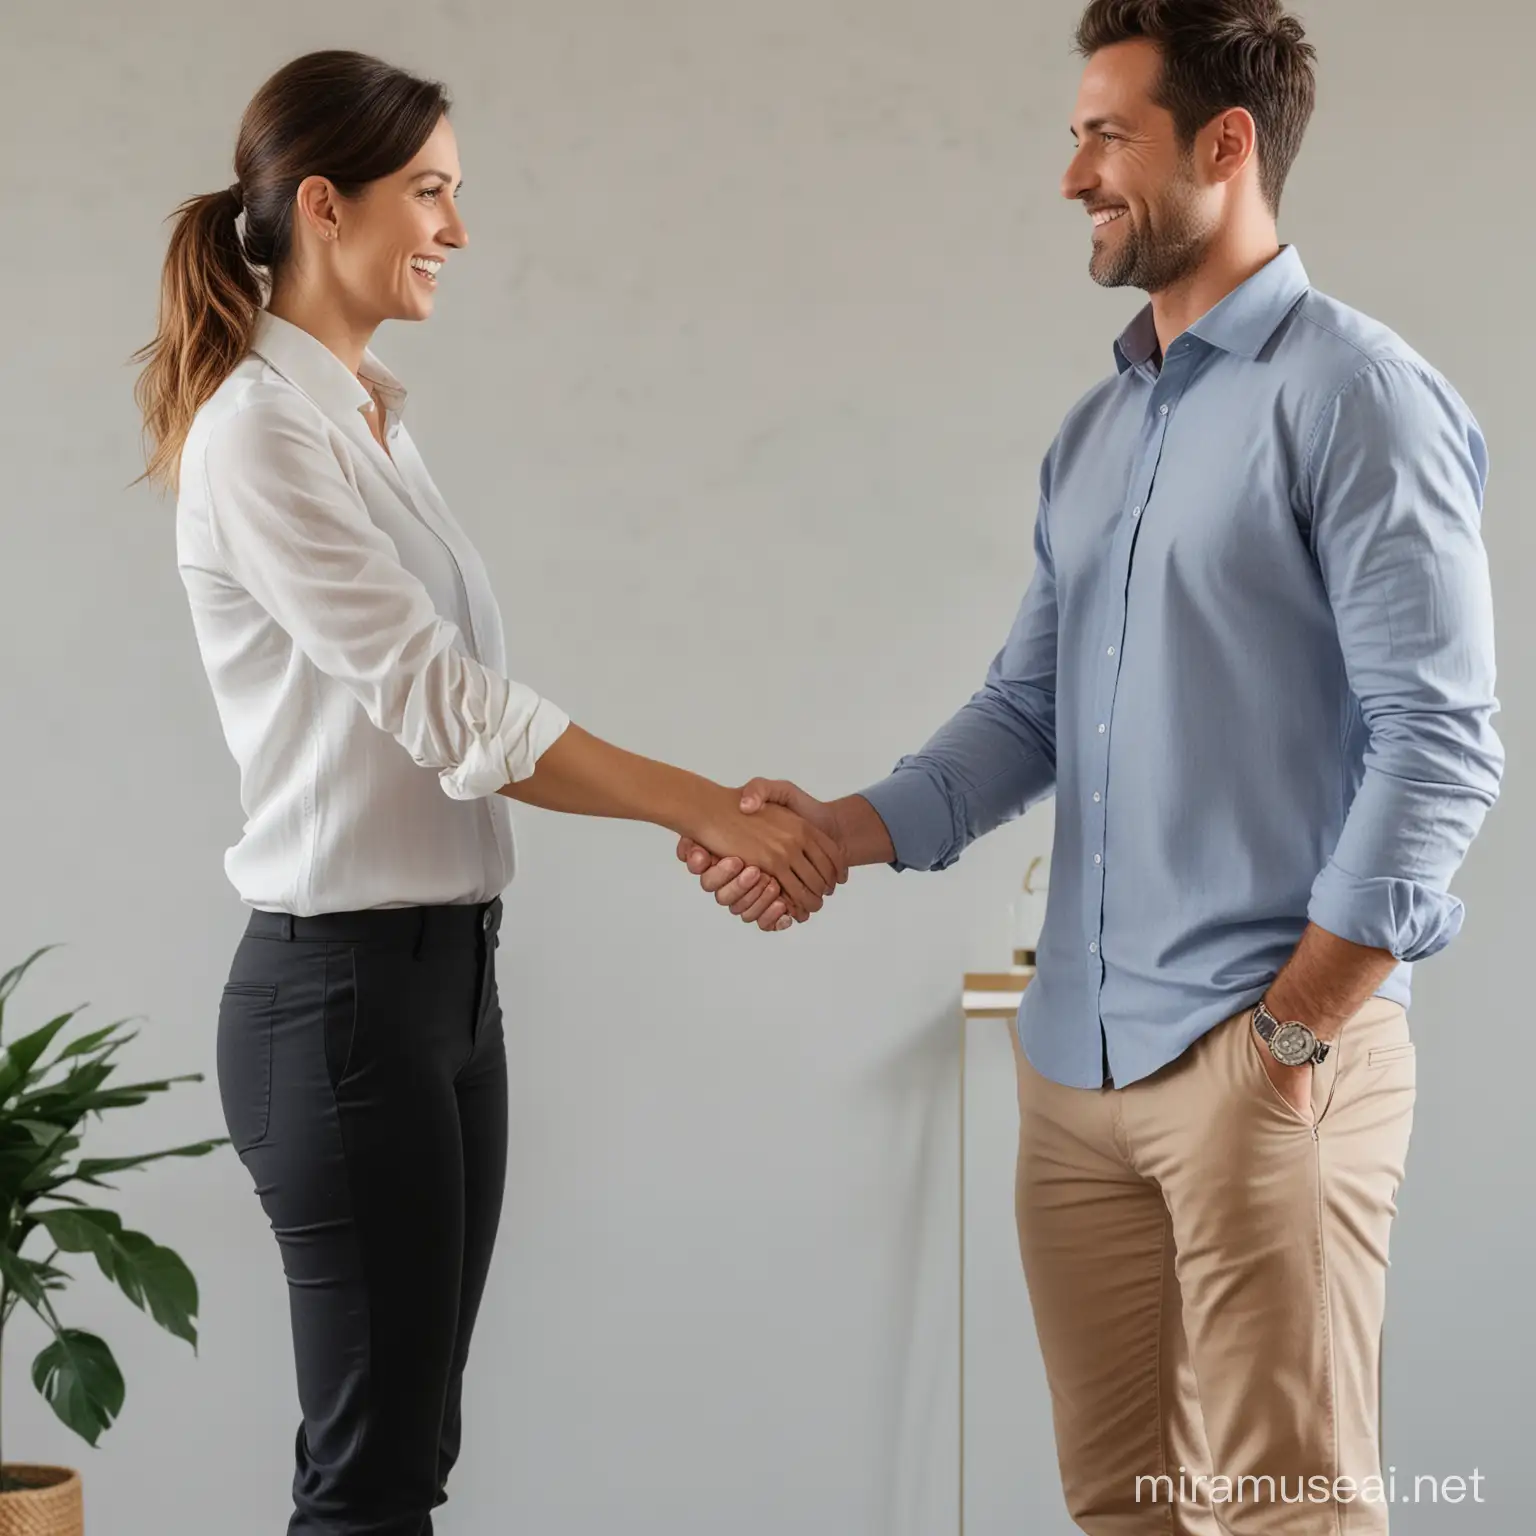 Confident Saleswoman and Male Business Owner Shaking Hands in New Zealand